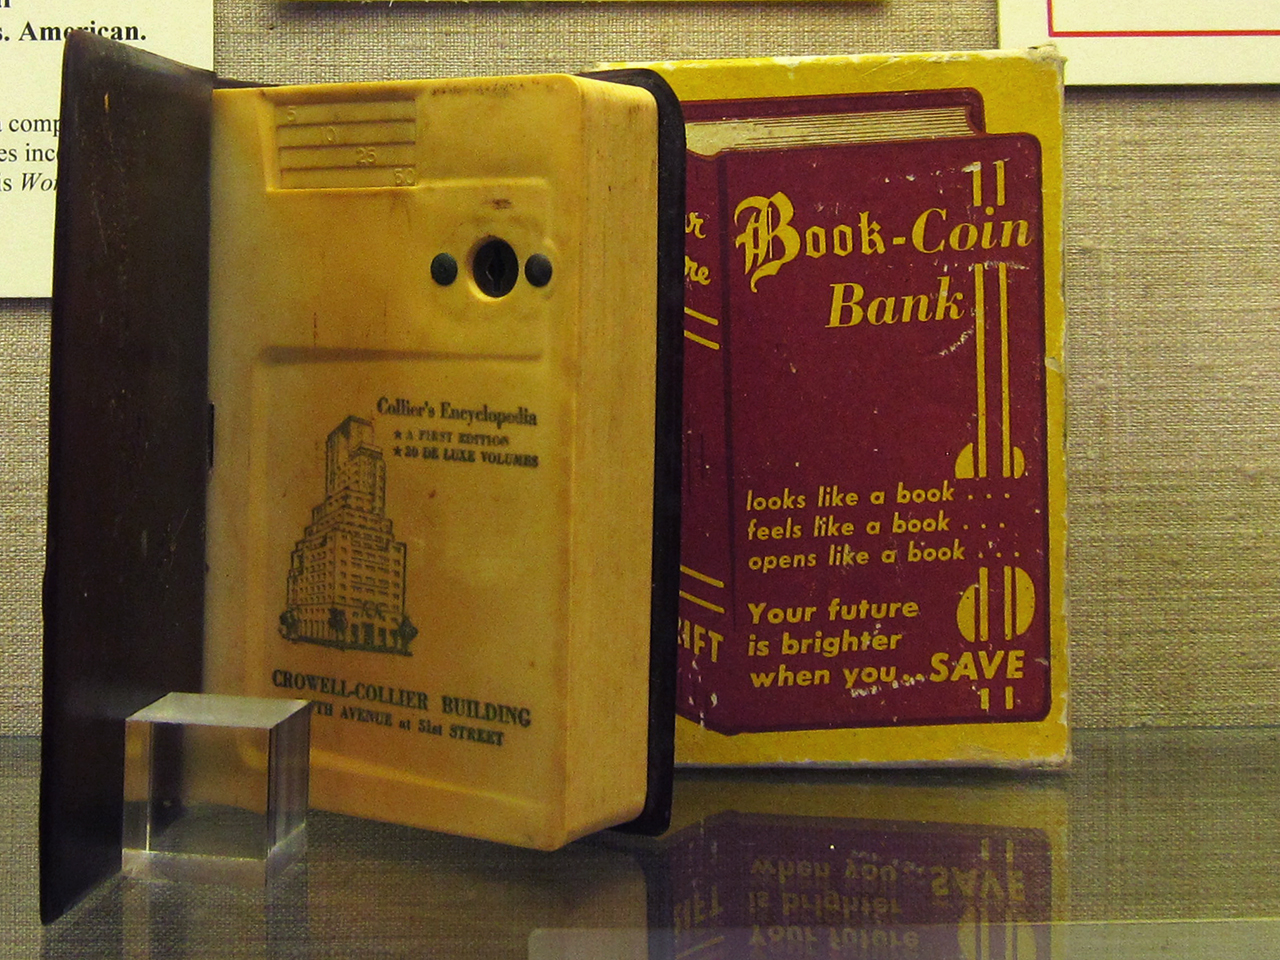 Crowell, Collier and McMillan, "Your Future" (1950s-60s), a child's book-coin bank